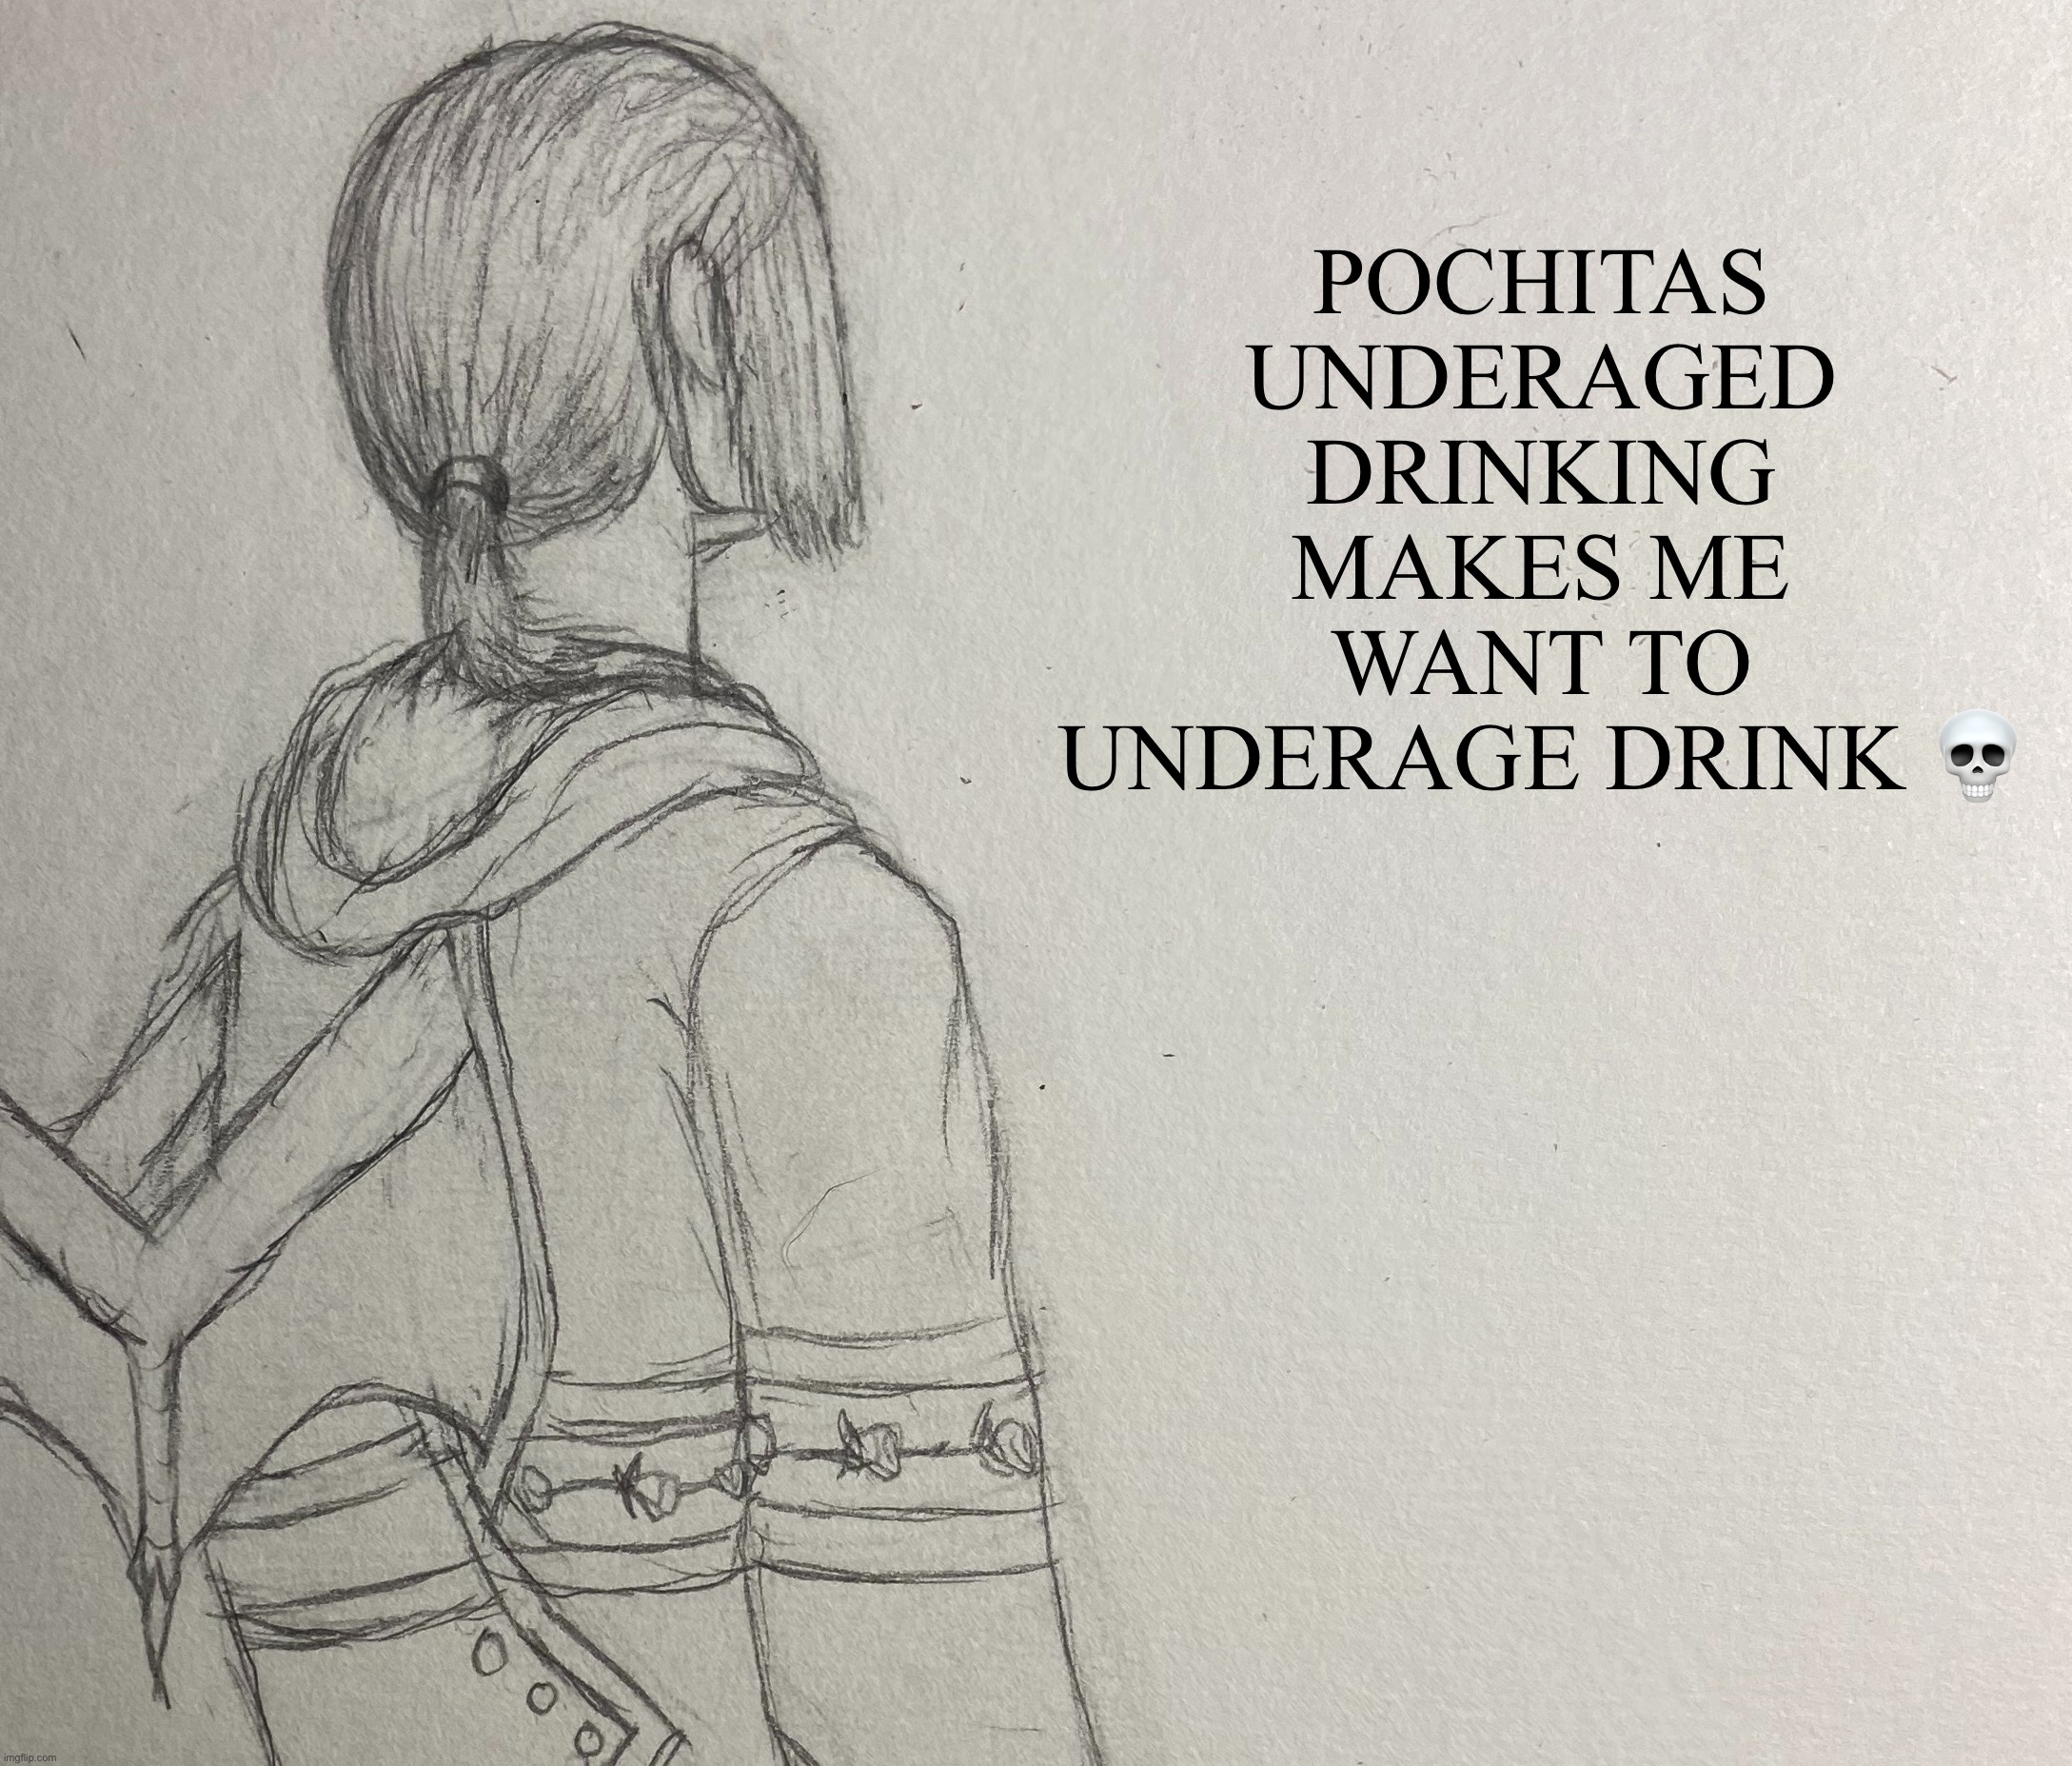 It sounds fun (New drawing) (no I won’t actually do it sadly) | POCHITAS UNDERAGED DRINKING MAKES ME WANT TO UNDERAGE DRINK 💀 | image tagged in shitpost,drawing | made w/ Imgflip meme maker